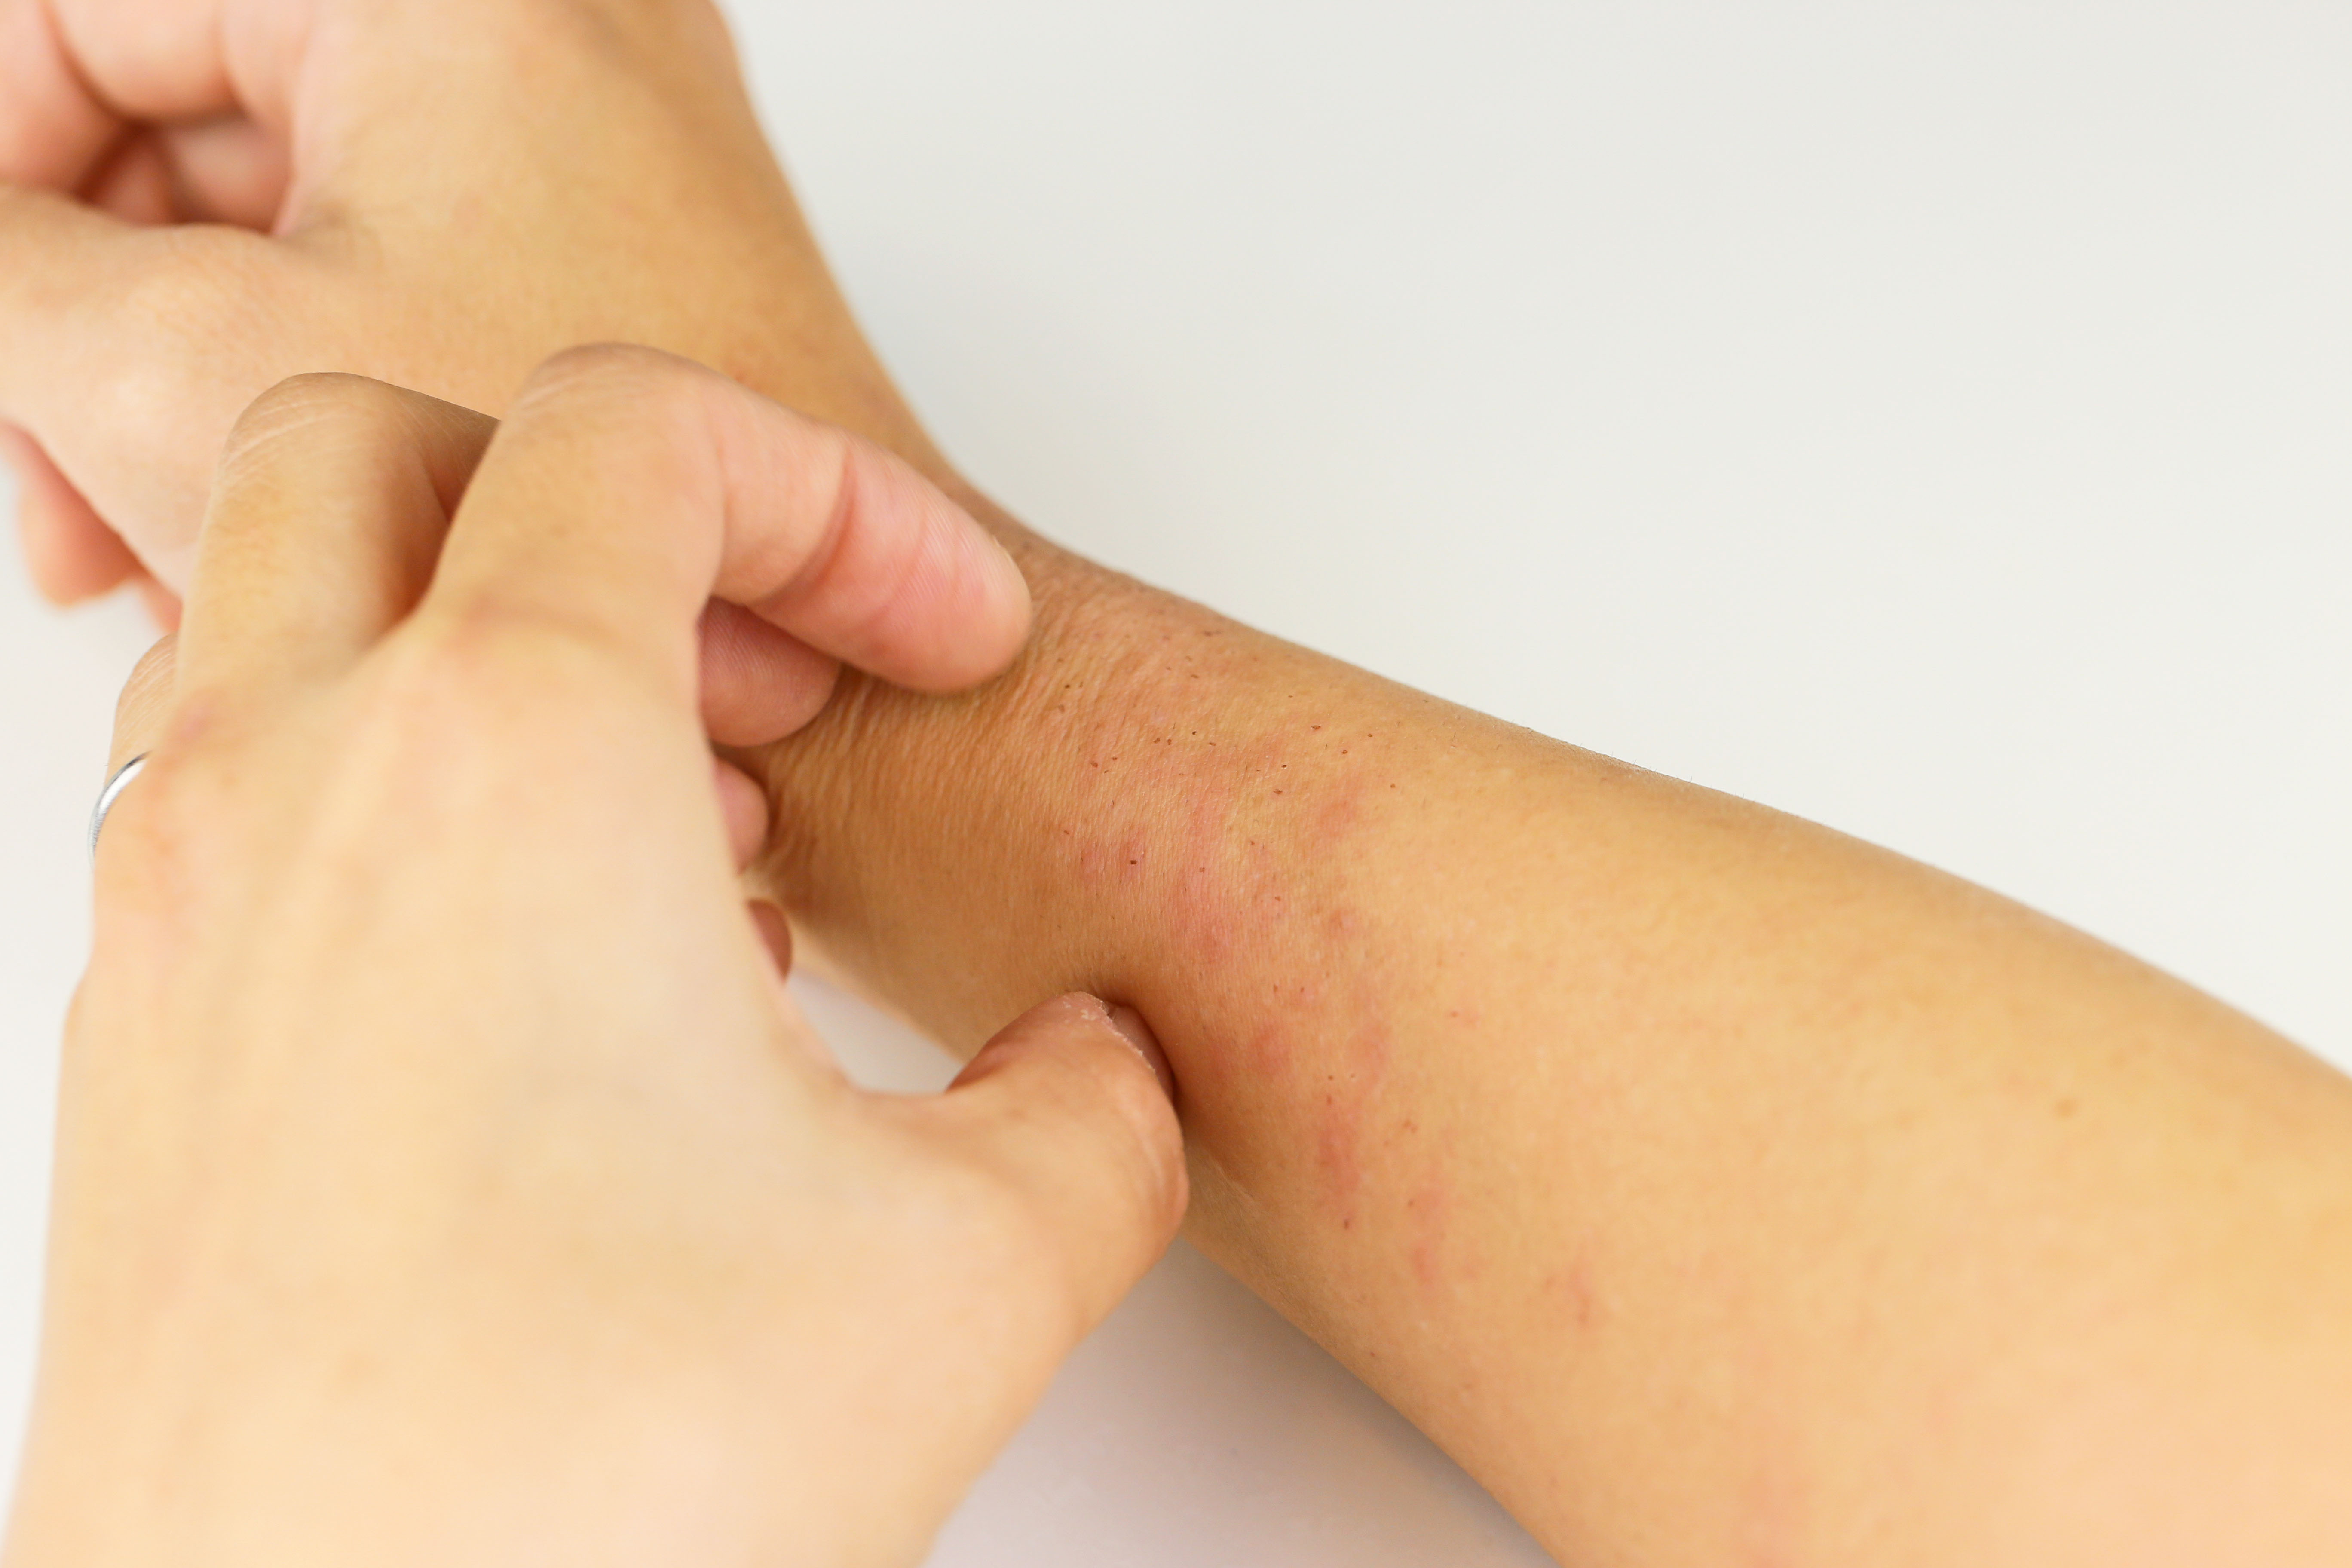 skin rashes that itch only on hand